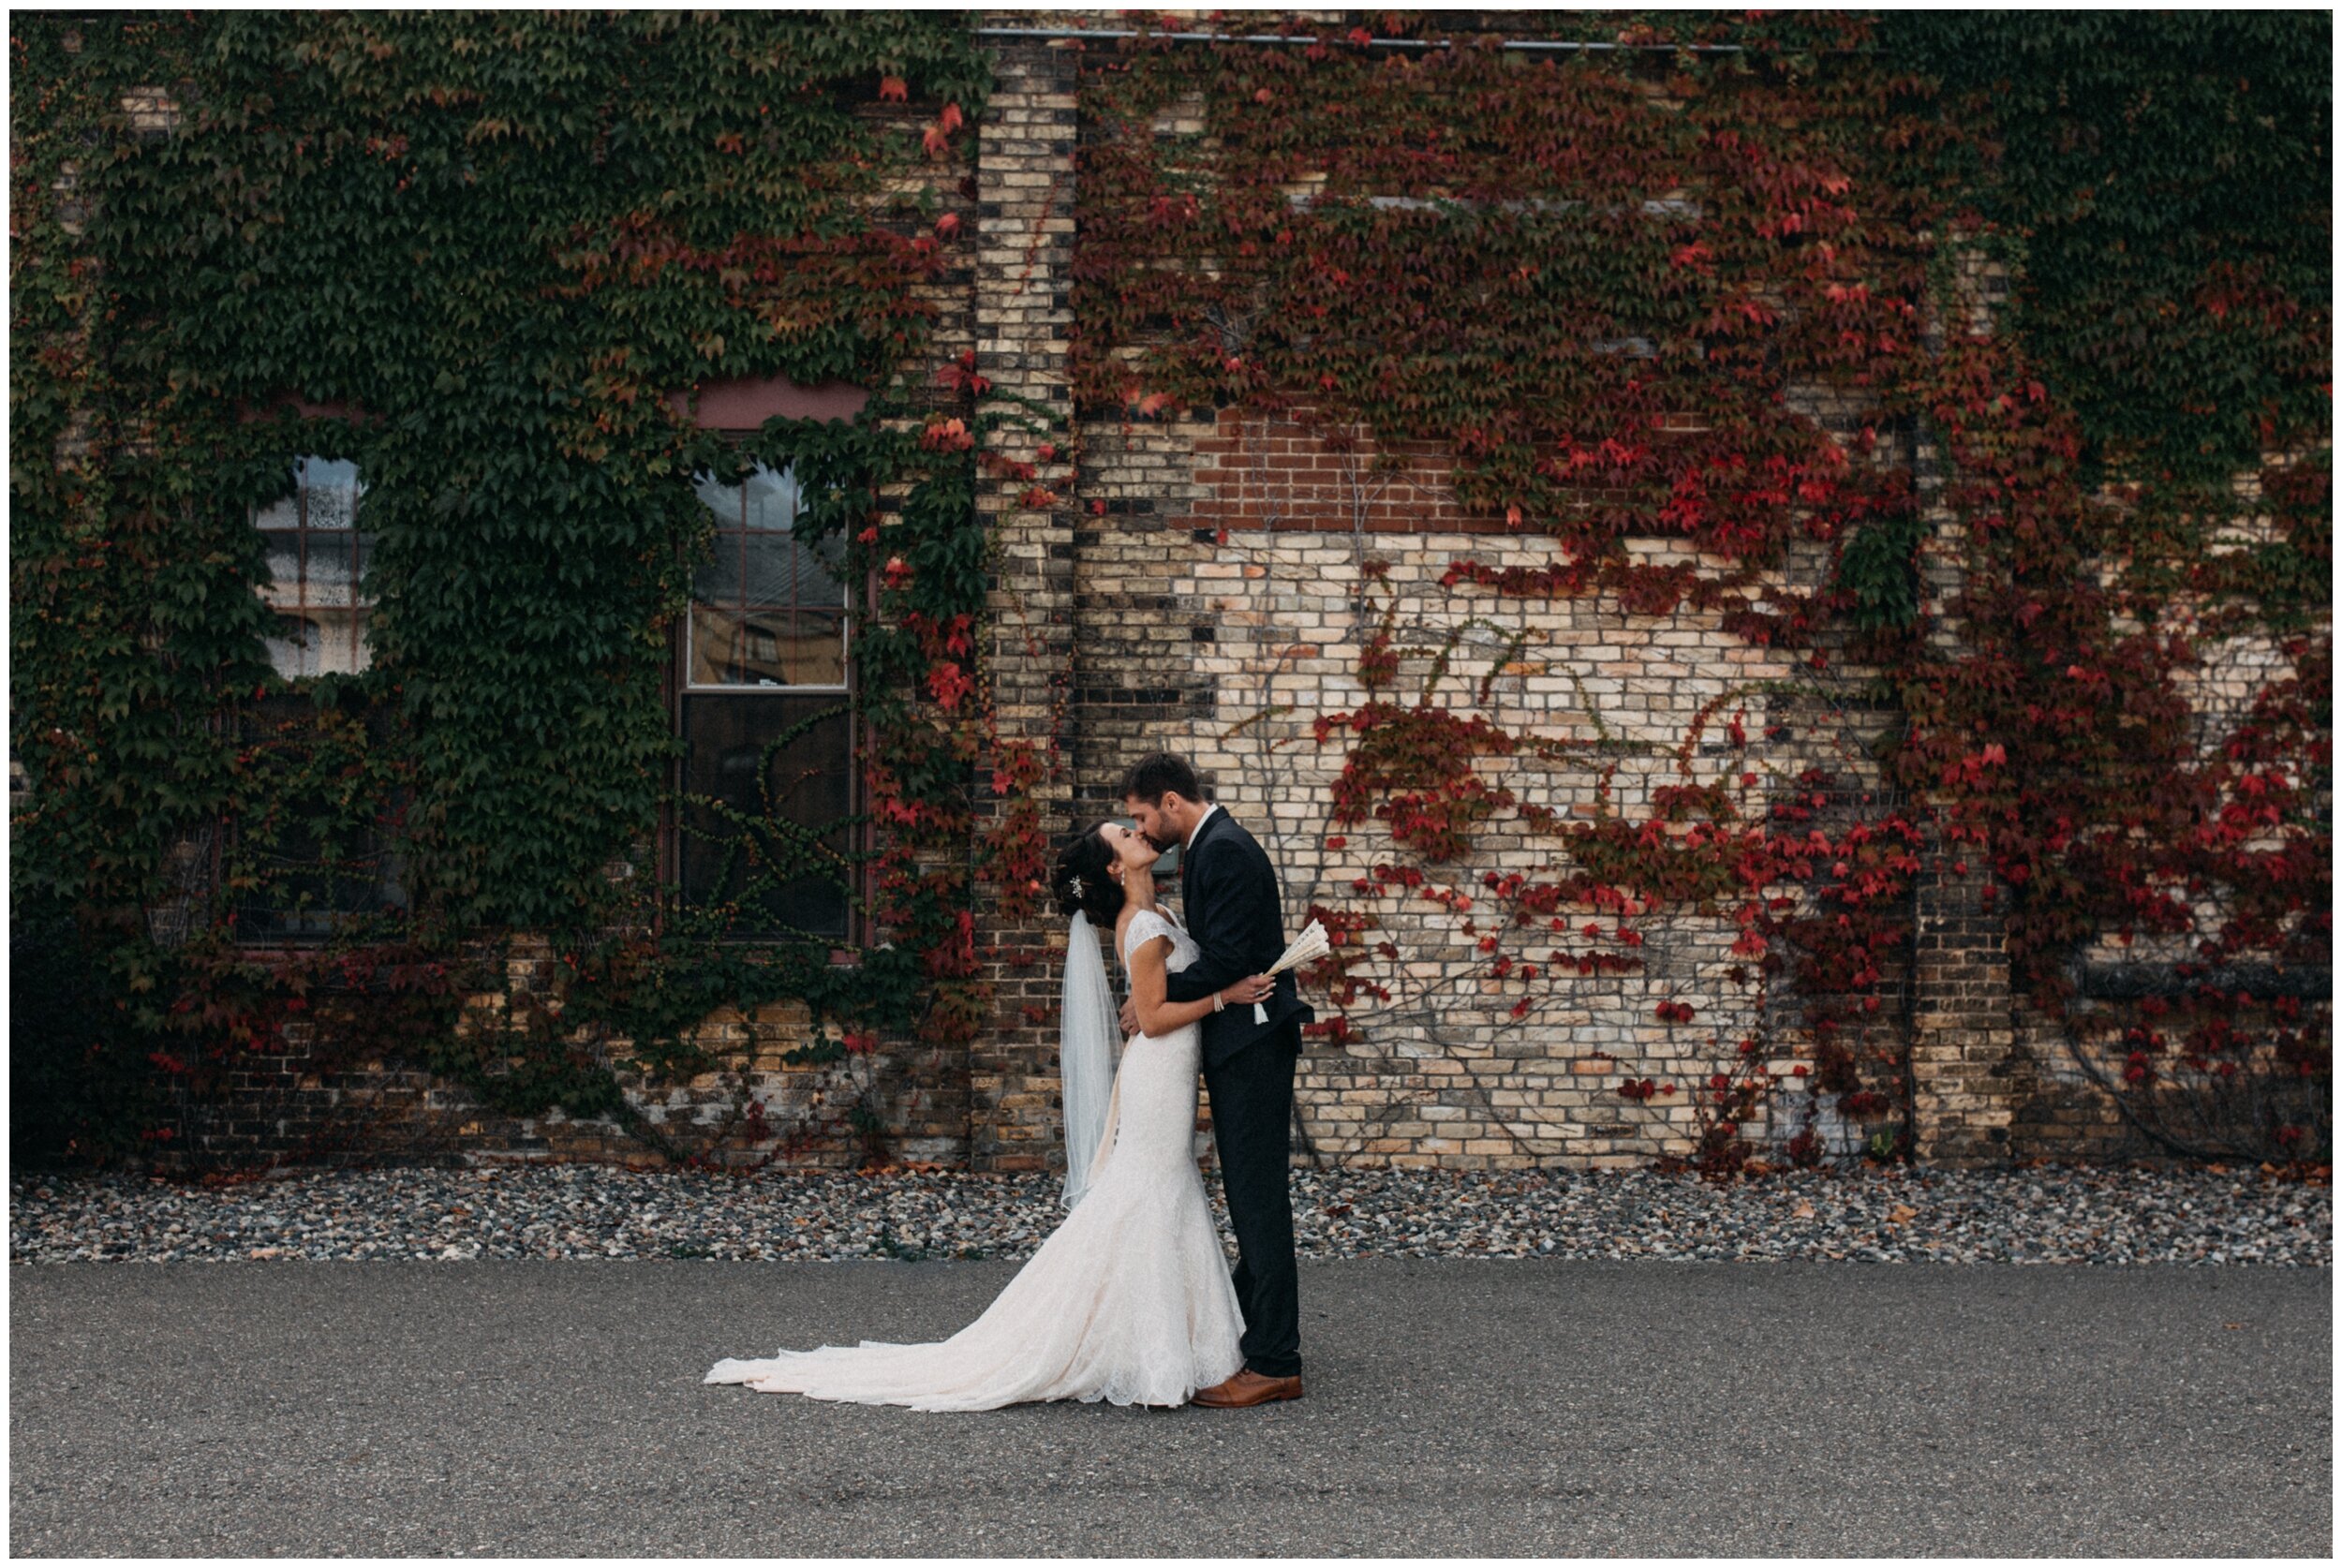 Bride and groom kissing in front of industrial ivy, brick wall during fall wedding at the Northern Pacific Center in Brainerd, Minnesota